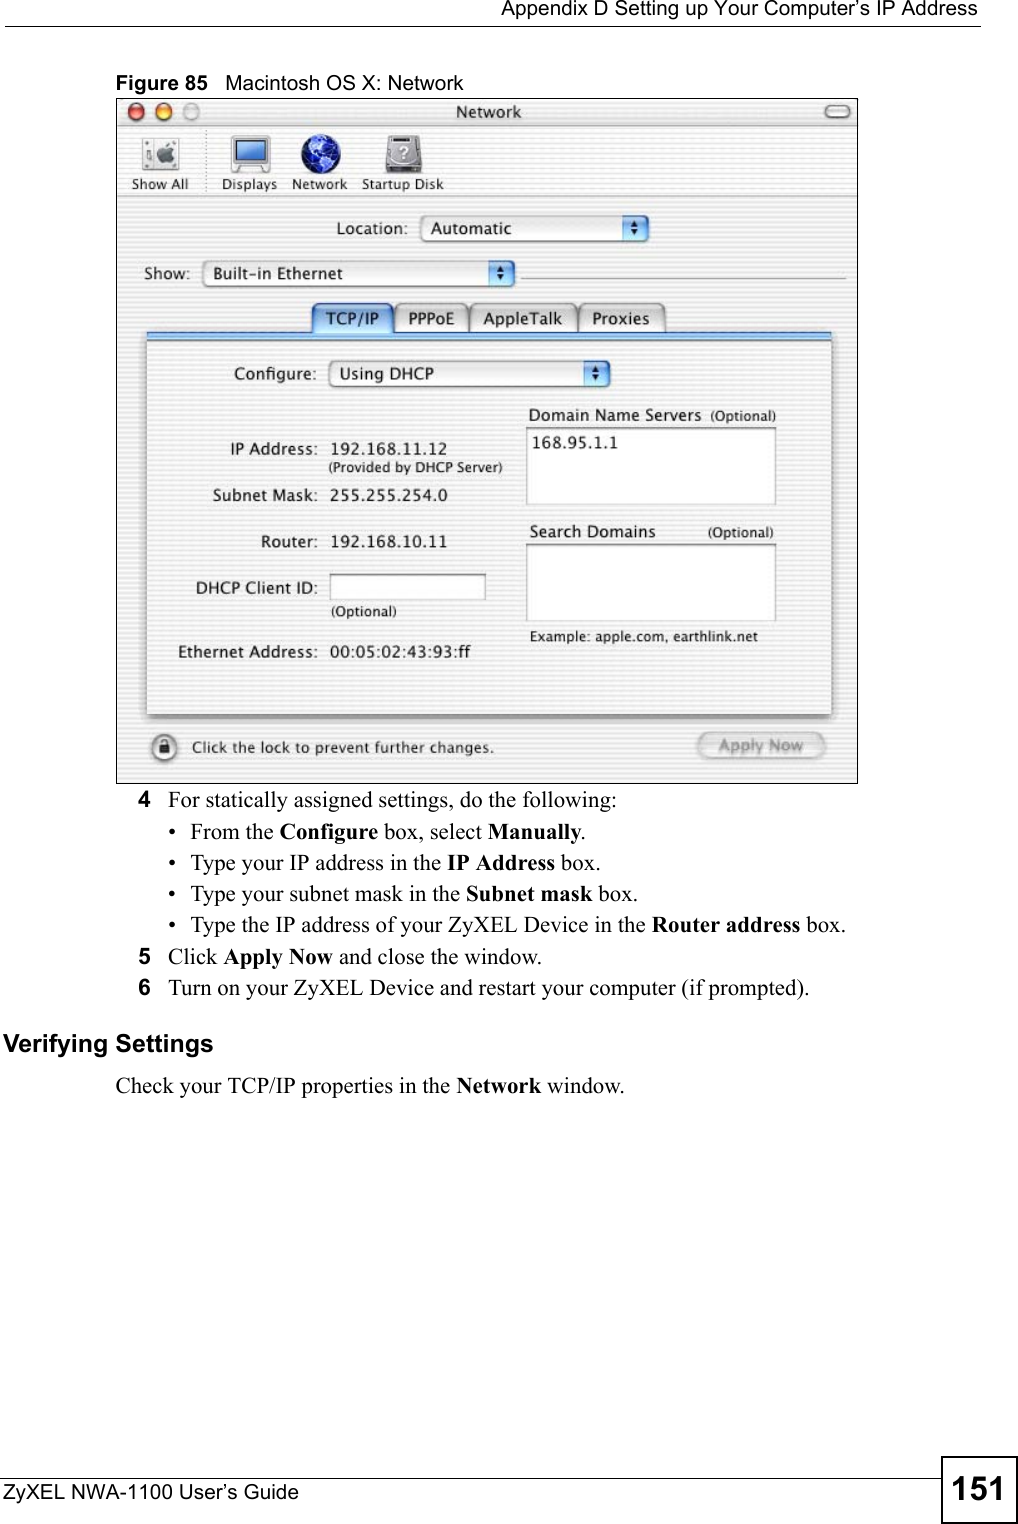  Appendix D Setting up Your Computer’s IP AddressZyXEL NWA-1100 User’s Guide 151Figure 85   Macintosh OS X: Network4For statically assigned settings, do the following:•From the Configure box, select Manually.• Type your IP address in the IP Address box.• Type your subnet mask in the Subnet mask box.• Type the IP address of your ZyXEL Device in the Router address box.5Click Apply Now and close the window.6Turn on your ZyXEL Device and restart your computer (if prompted).Verifying SettingsCheck your TCP/IP properties in the Network window.